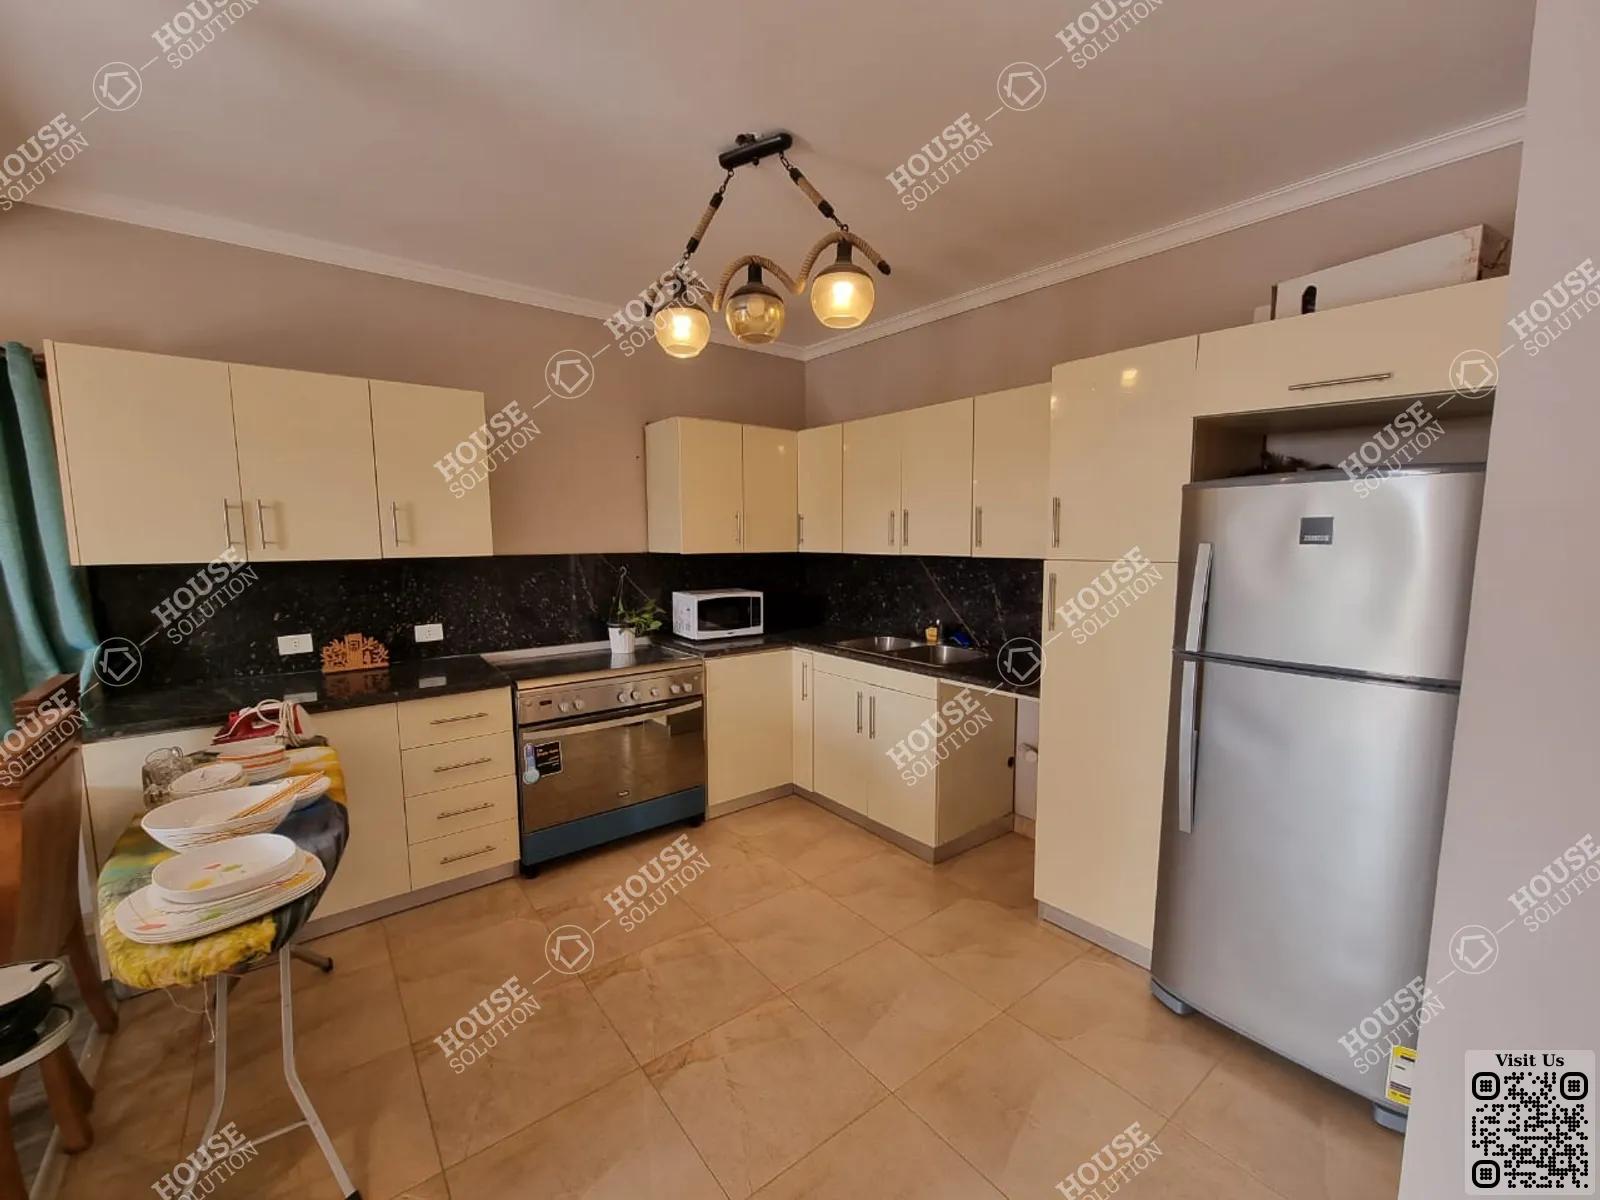 KITCHEN  @ Penthouses For Rent In Maadi Maadi Sarayat Area: 200 m² consists of 3 Bedrooms 2 Bathrooms Furnished 5 stars #2985-2